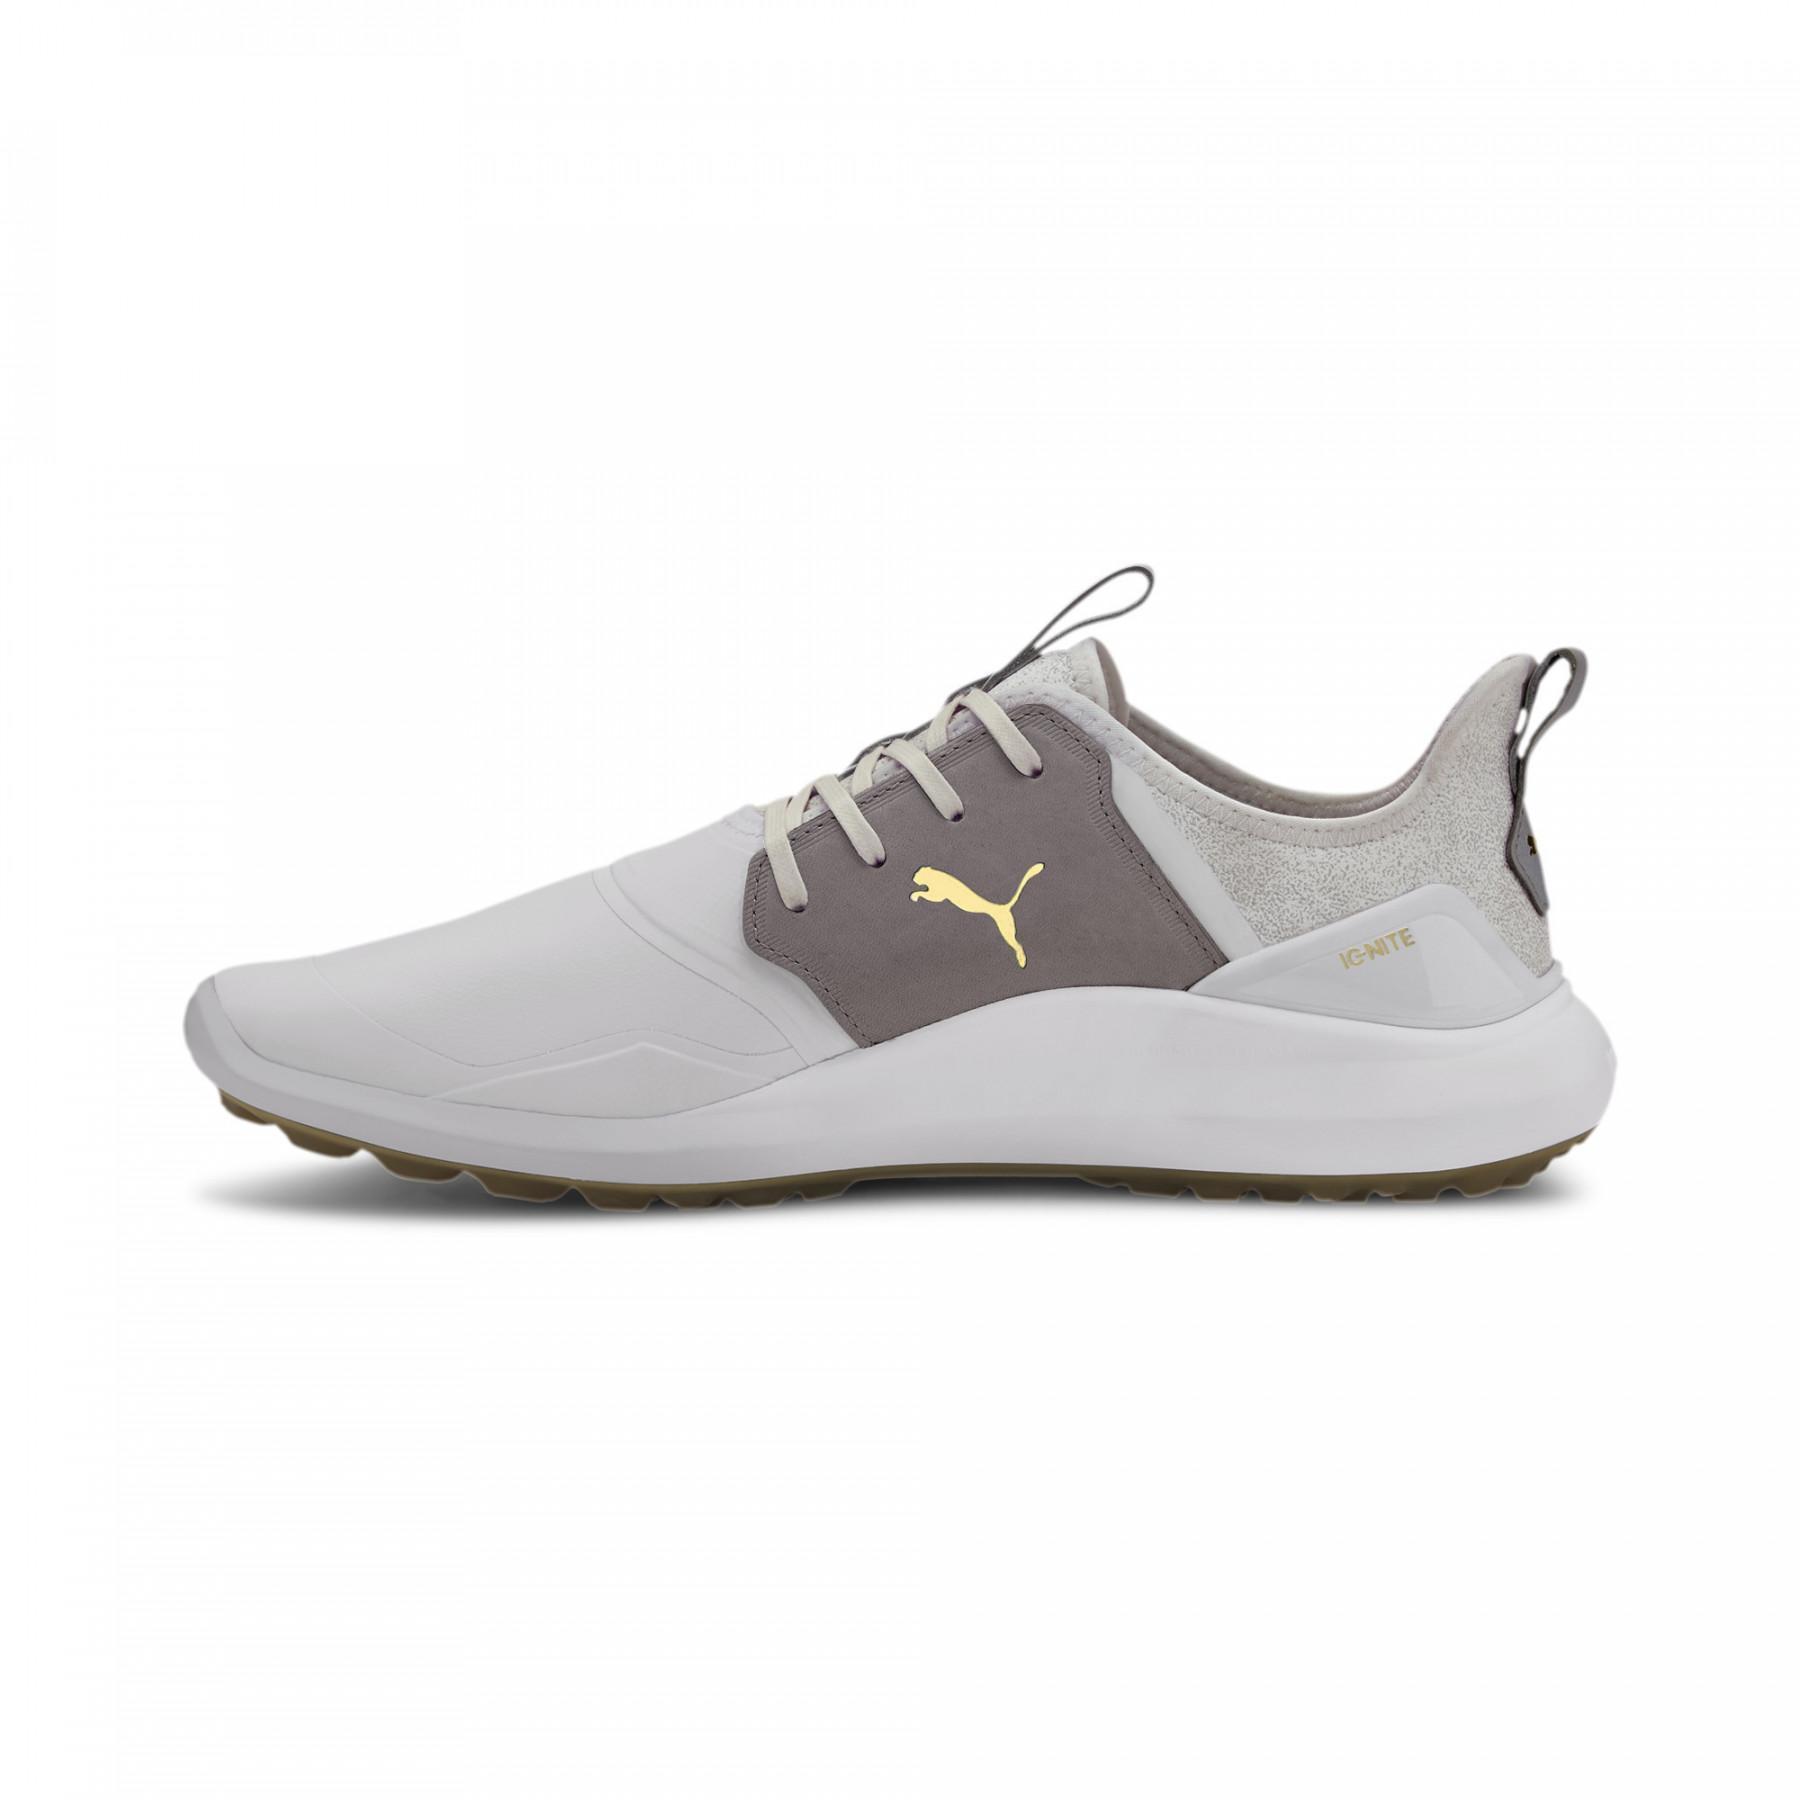 Chaussures Puma Ignite Nxt Crafted